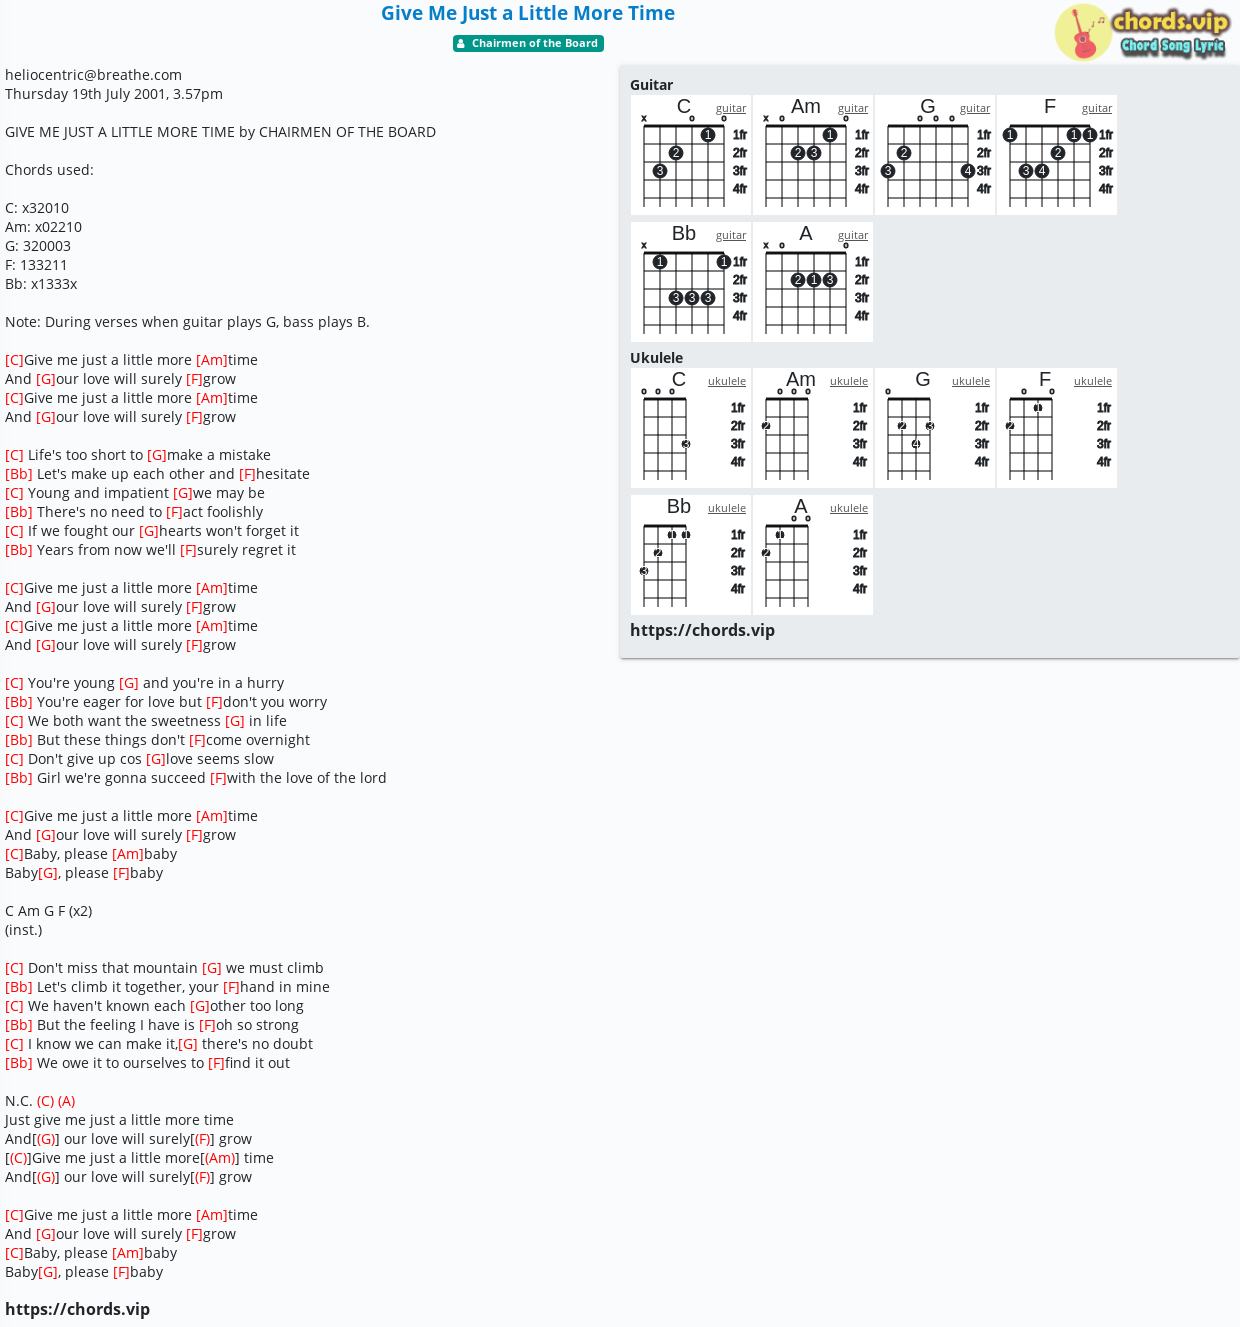 Chord: Give Me Just a Little More Time - of the Board - tab, song lyric, sheet, guitar, ukulele | chords.vip